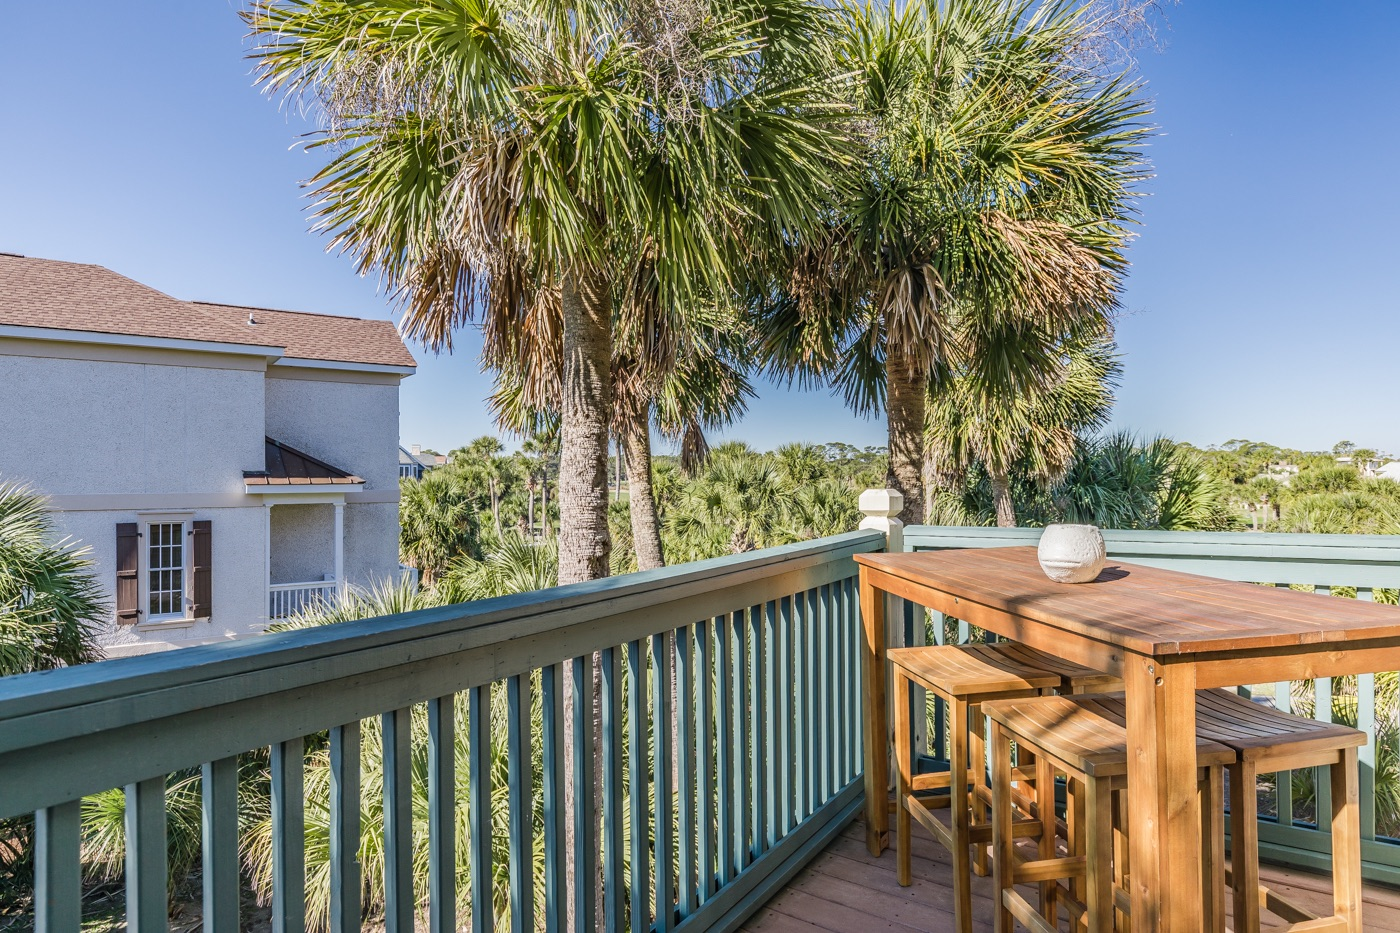 Enjoy cocktails or meals on the spacious deck with views of the ocean or golf course